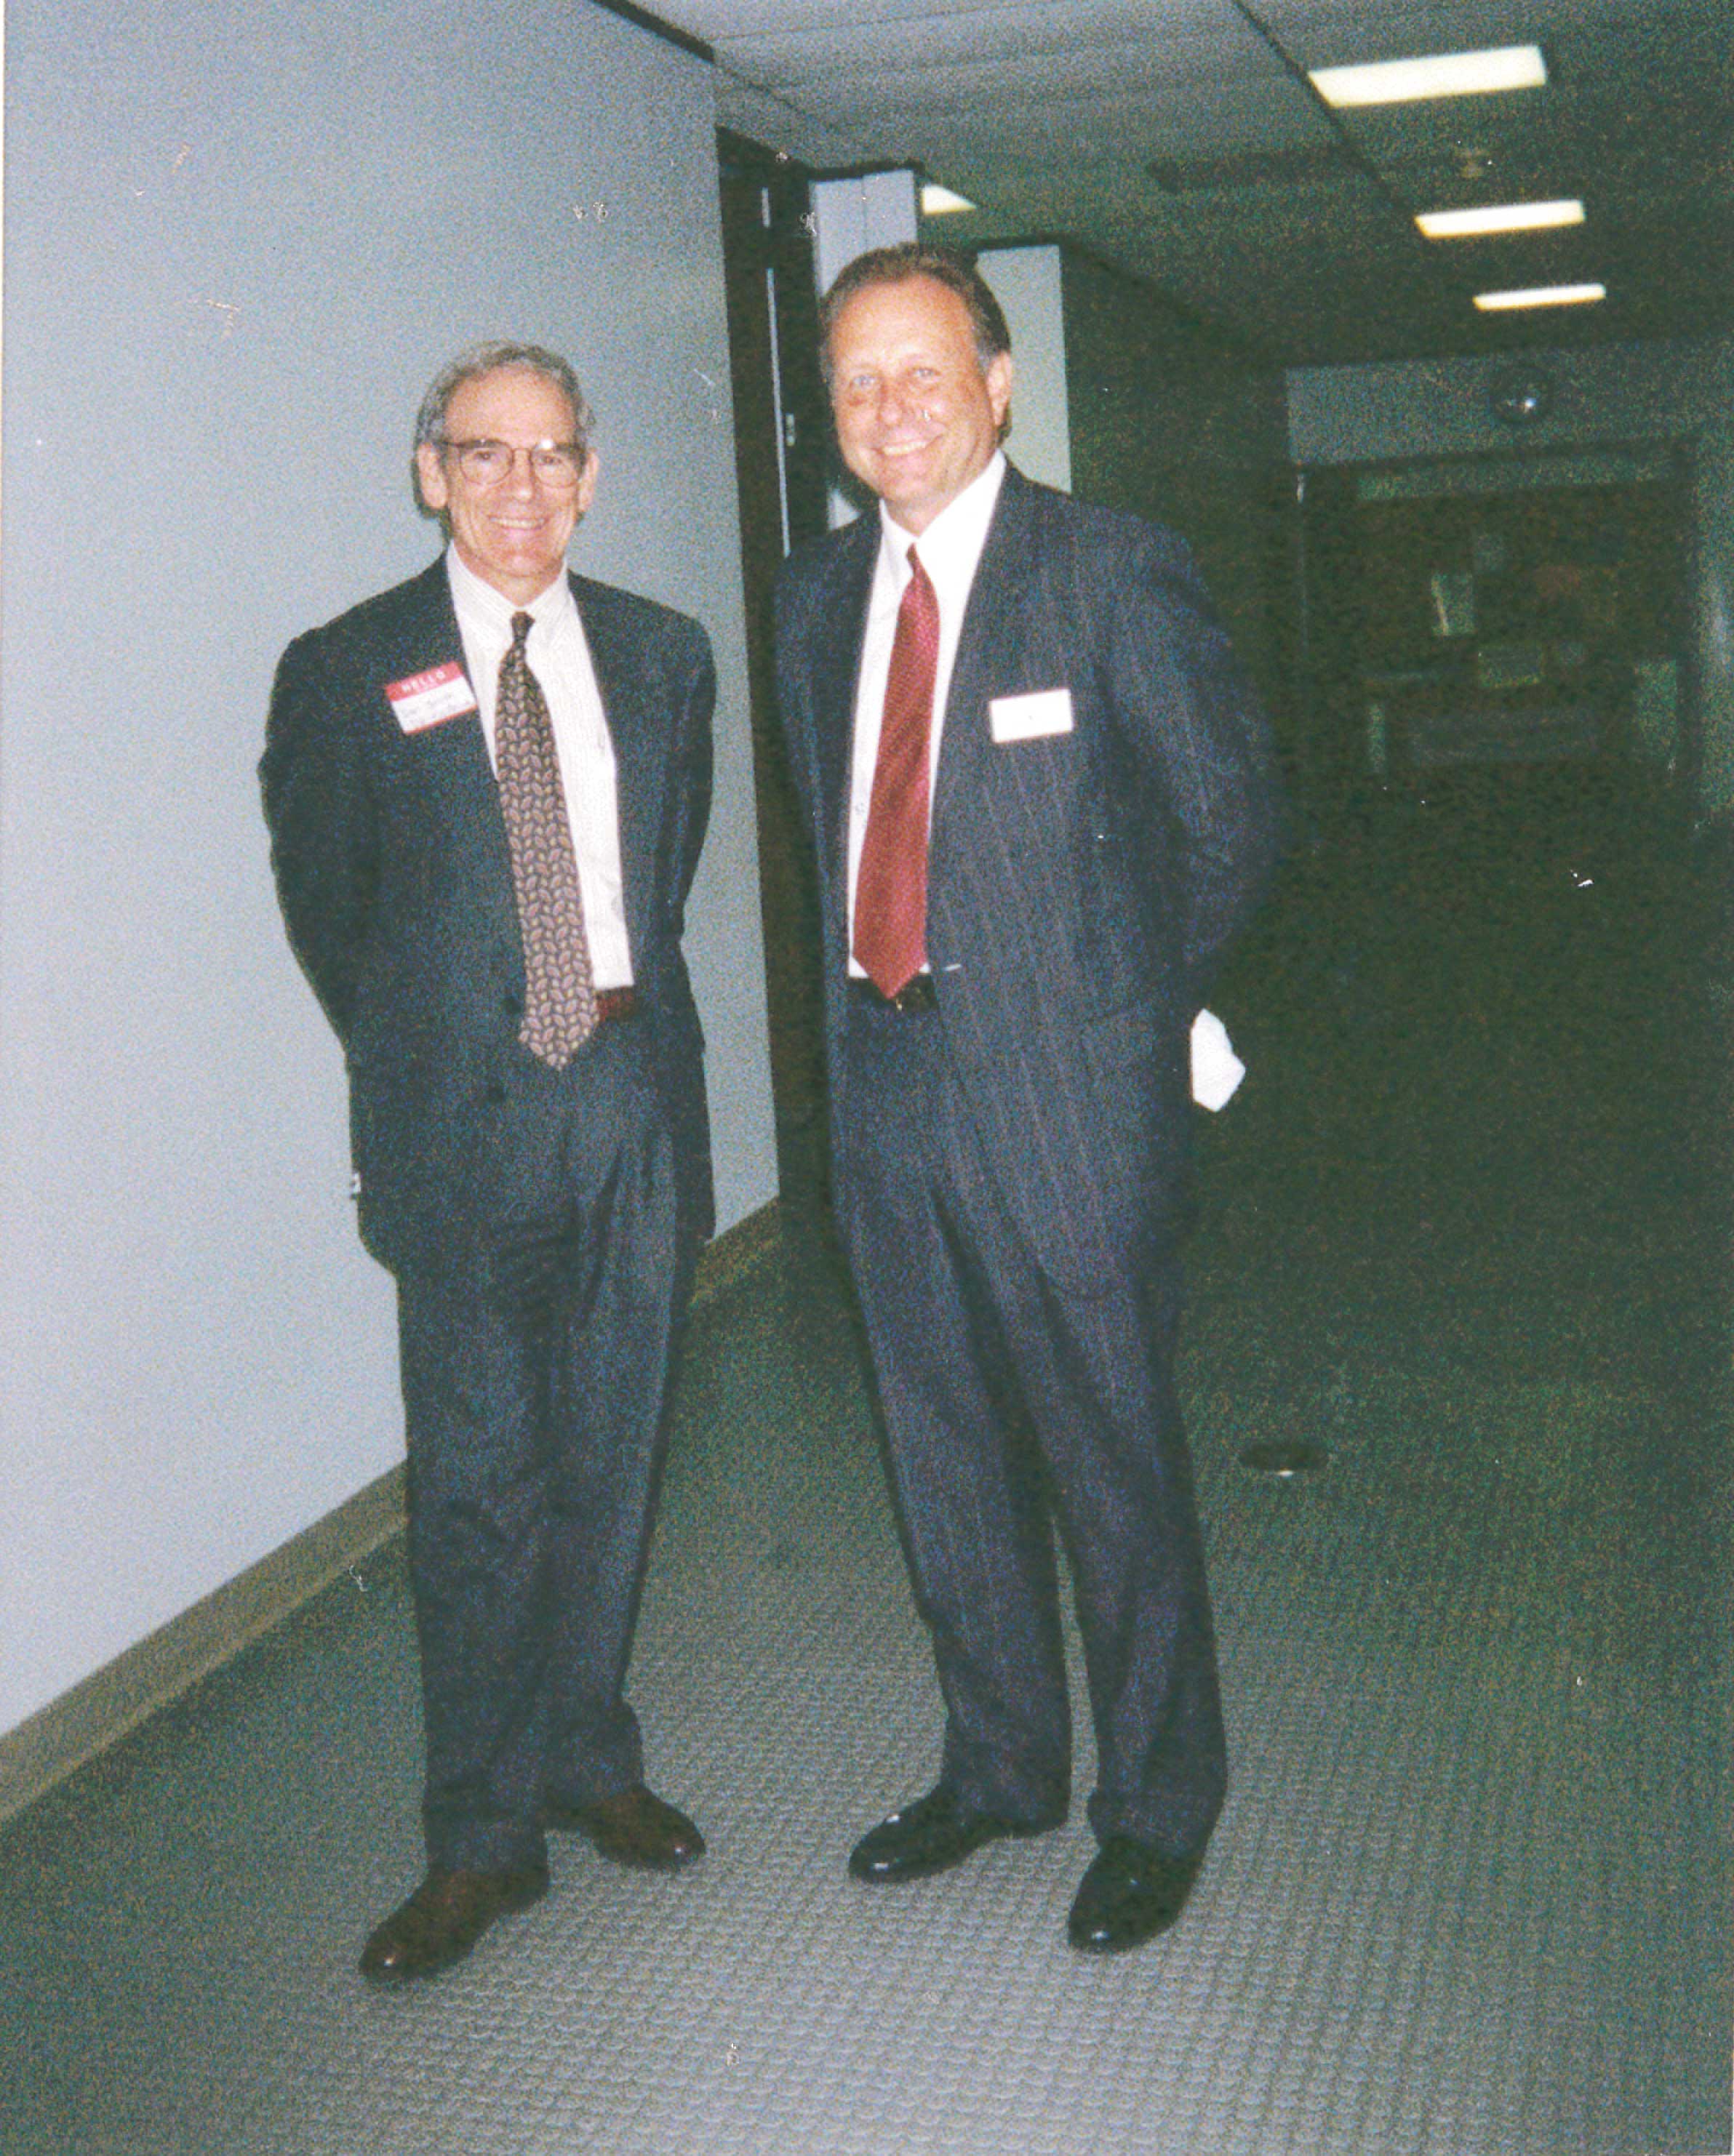 Photograph of two men in suits standing in a hallway.